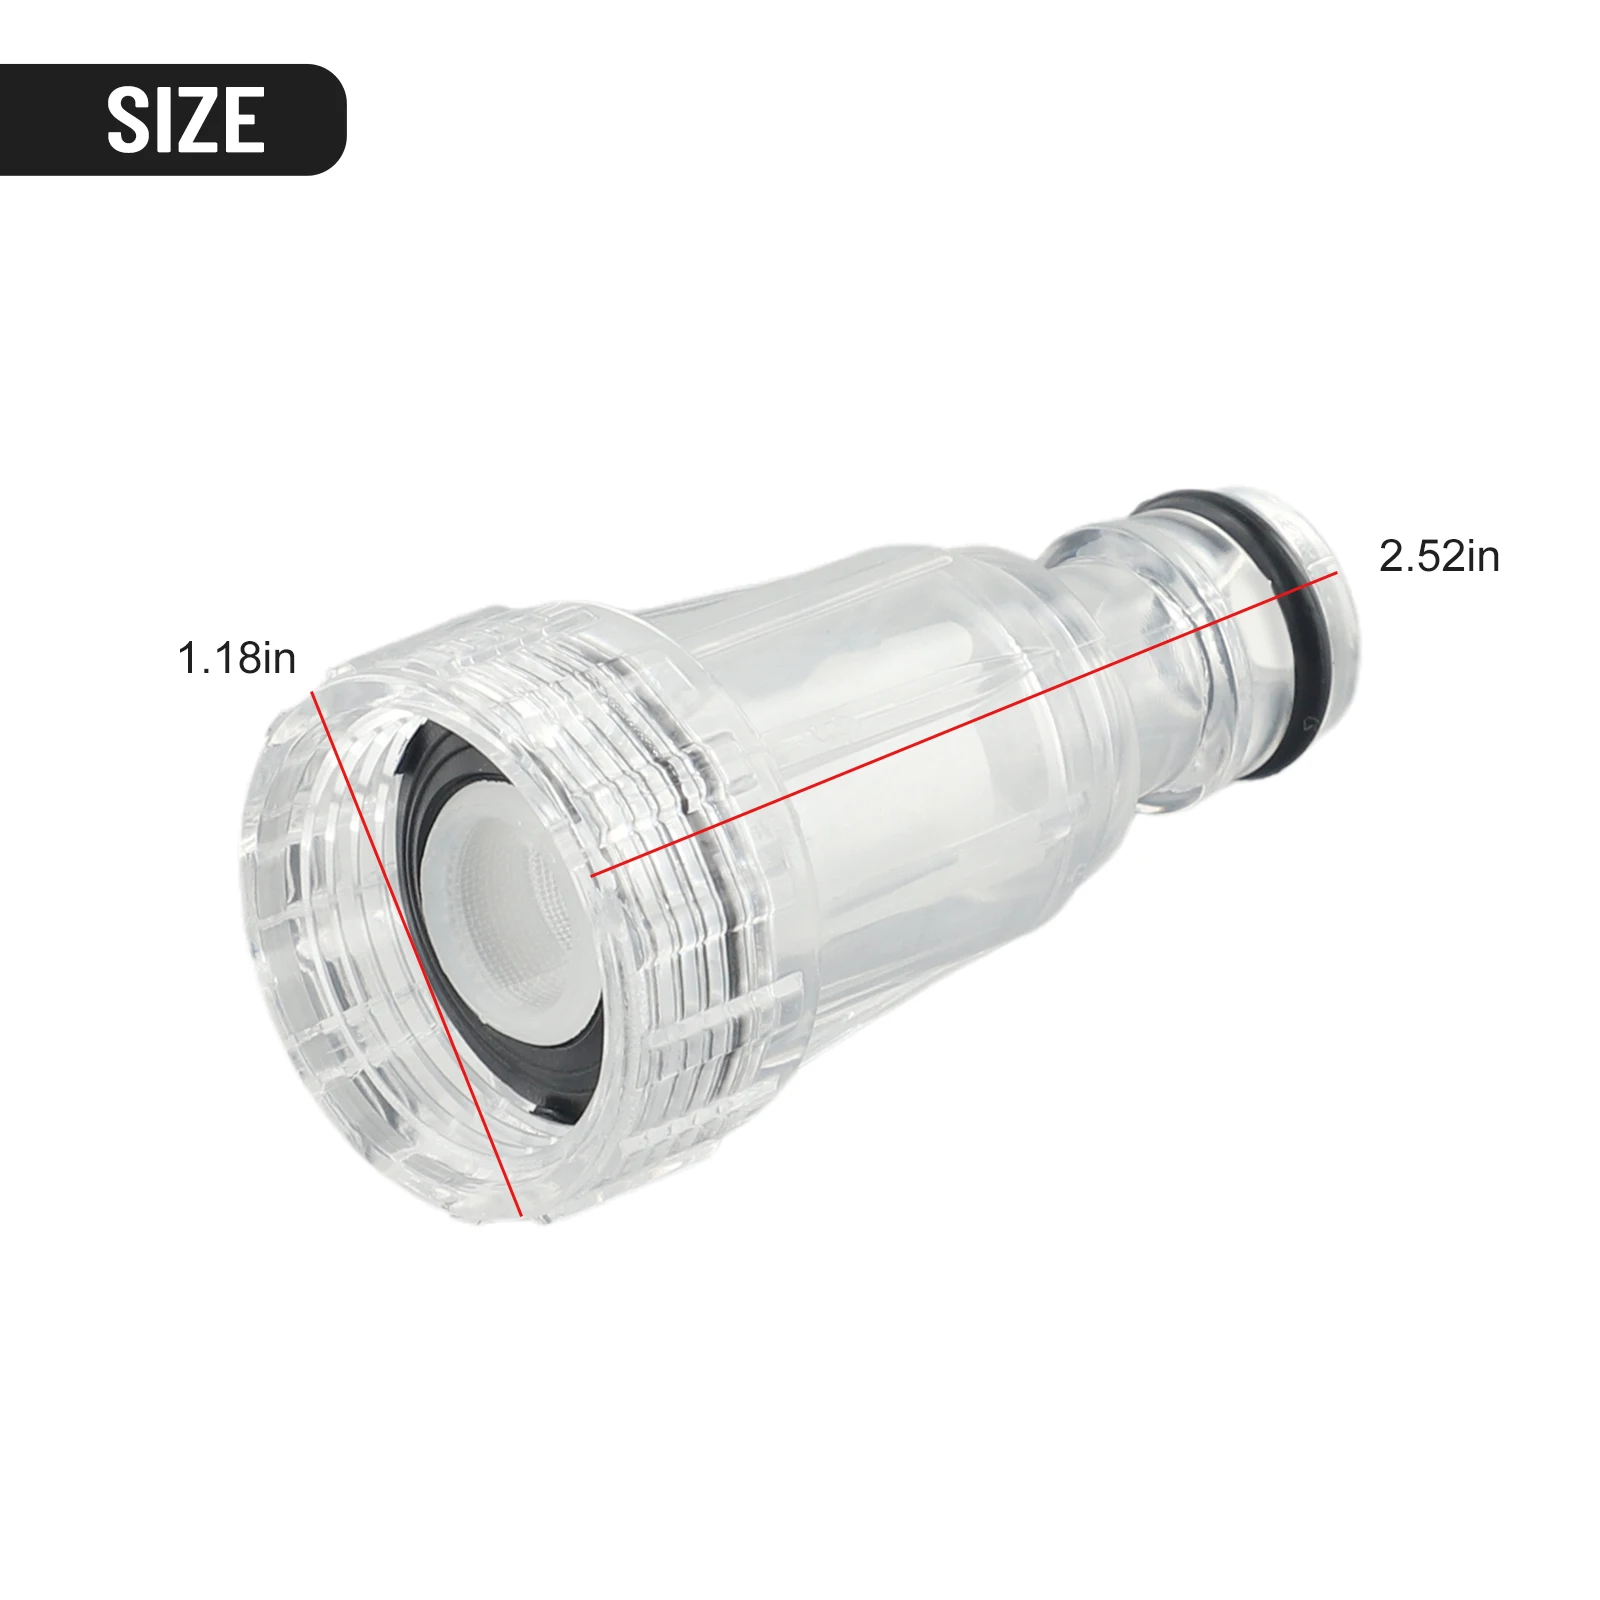 1pcs High Pressure Connection Filter+2pcs Nets For For Karcher K2-K7 Series Washer Garden Pipe Hose Adapter  Pressure Washers 2pcs vacuum cleaner extension wands vacuum cleaner accessories 32mm inner diameter vacuum hose plastic wand pipe replacement